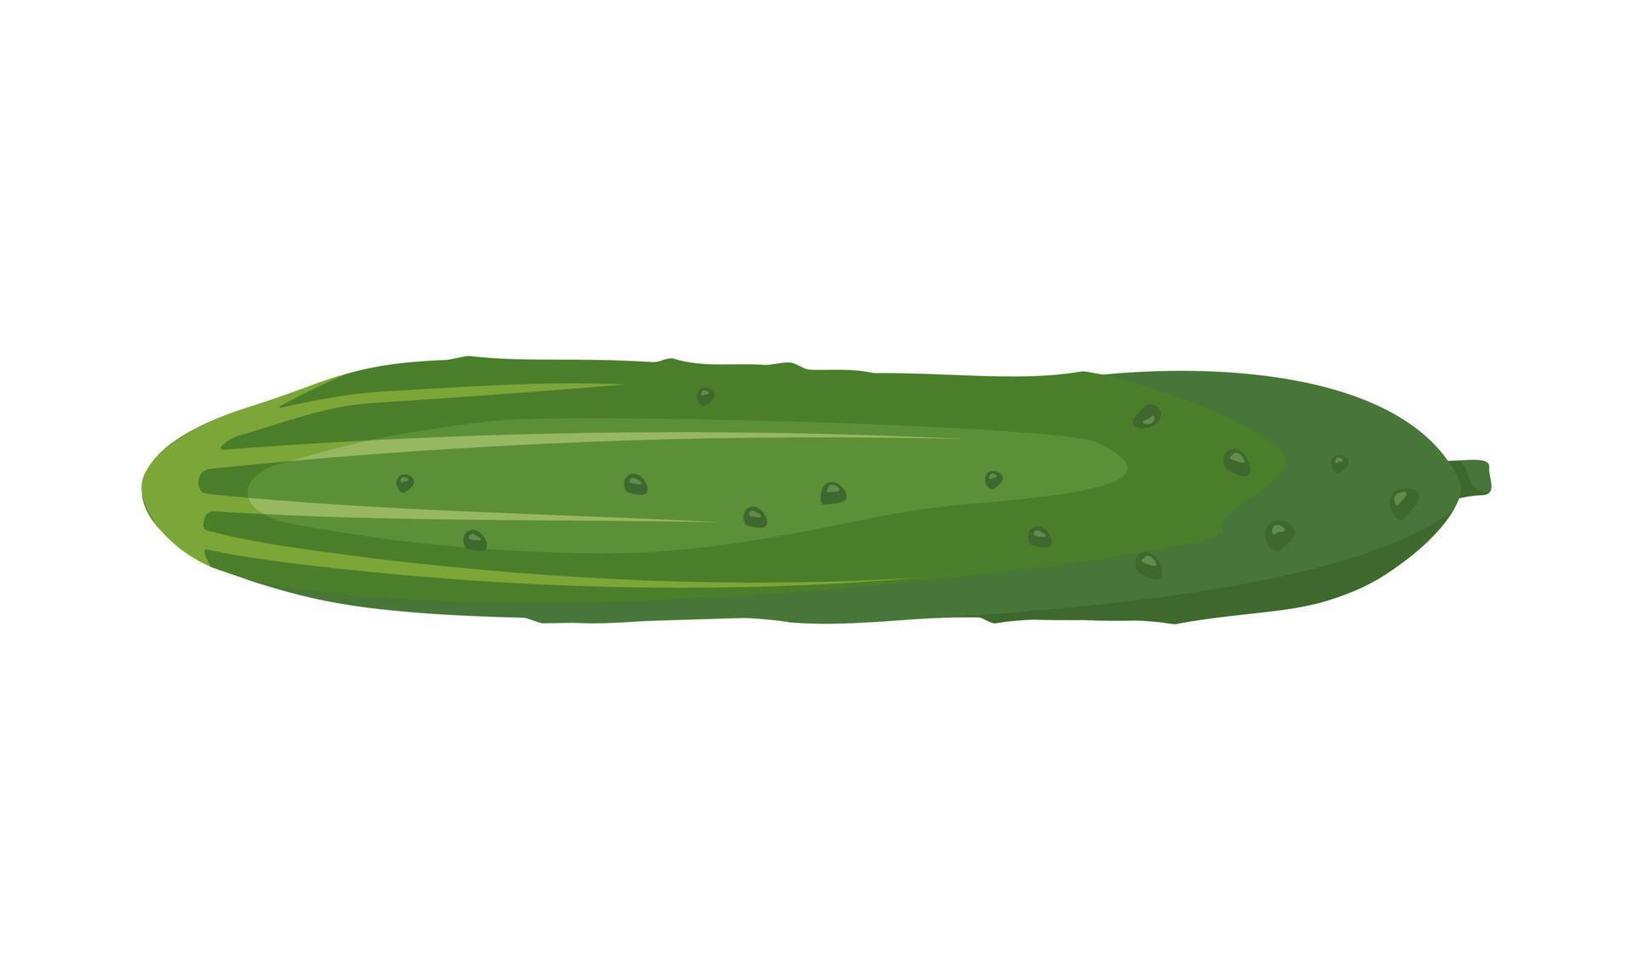 Green cucumber icon. Delicious healthy vegetable, fresh food for salad preparation, harvest. Vector flat illustration